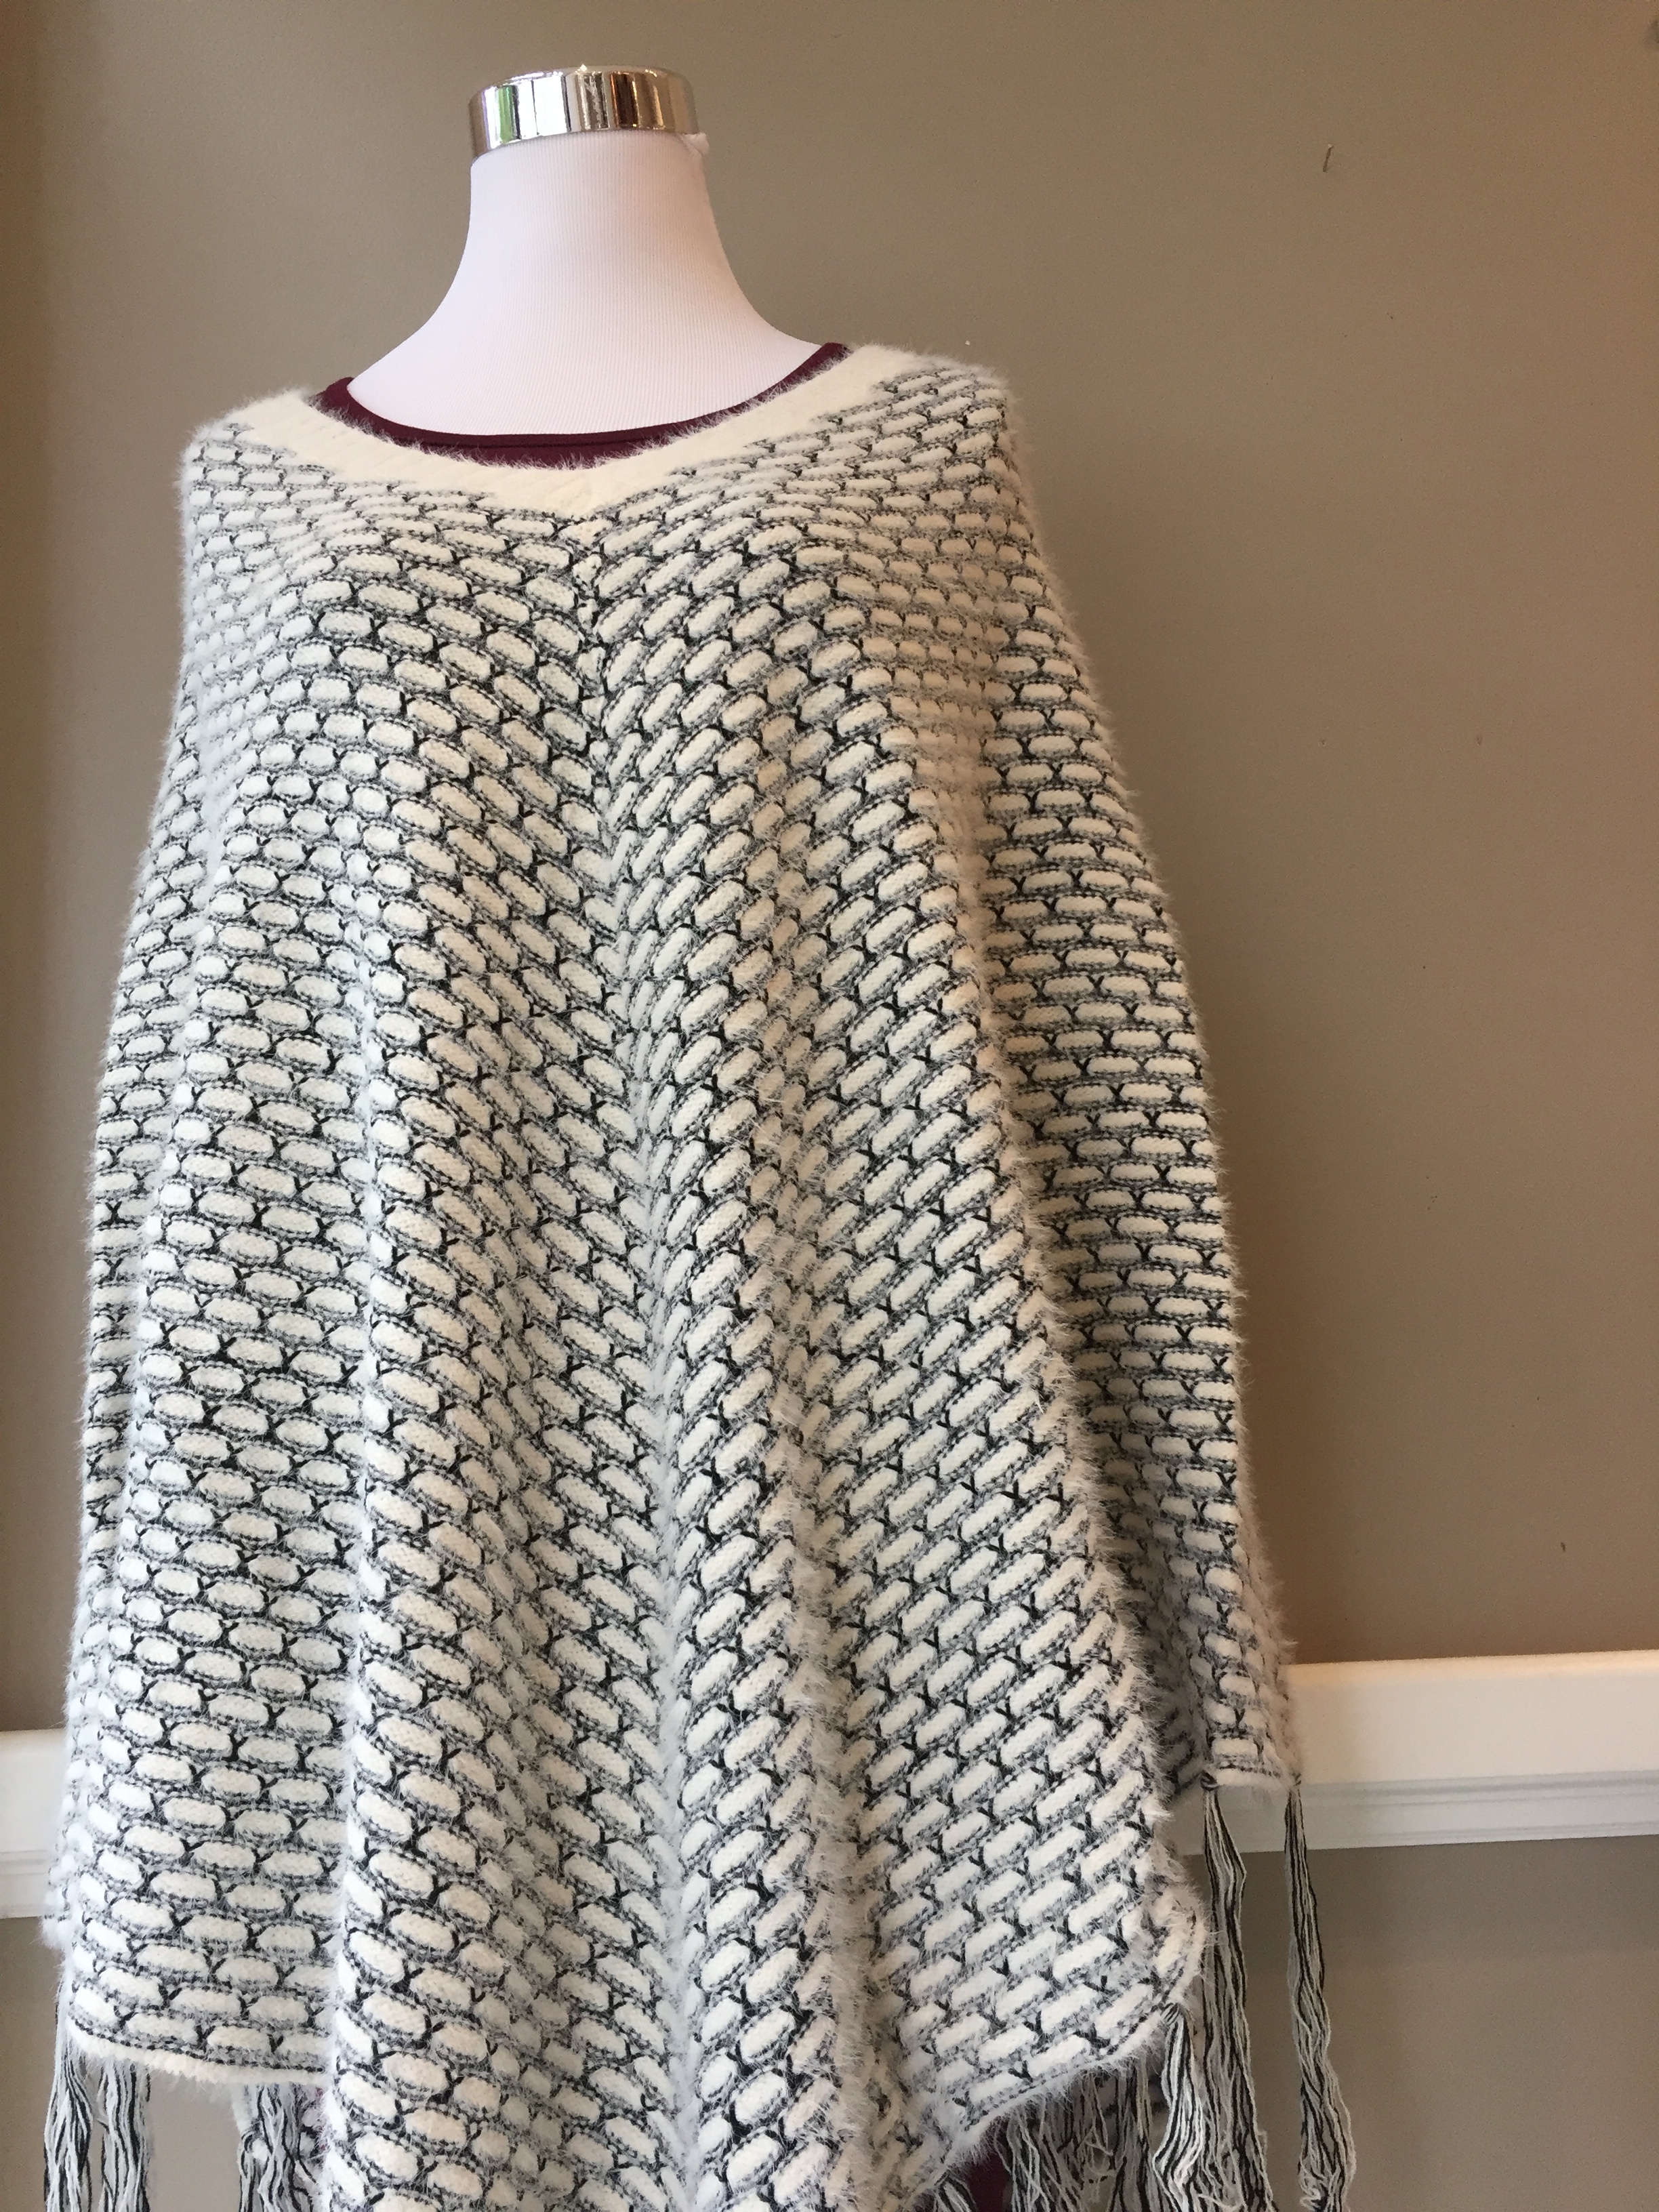 Black and white poncho ($38, also in navy)